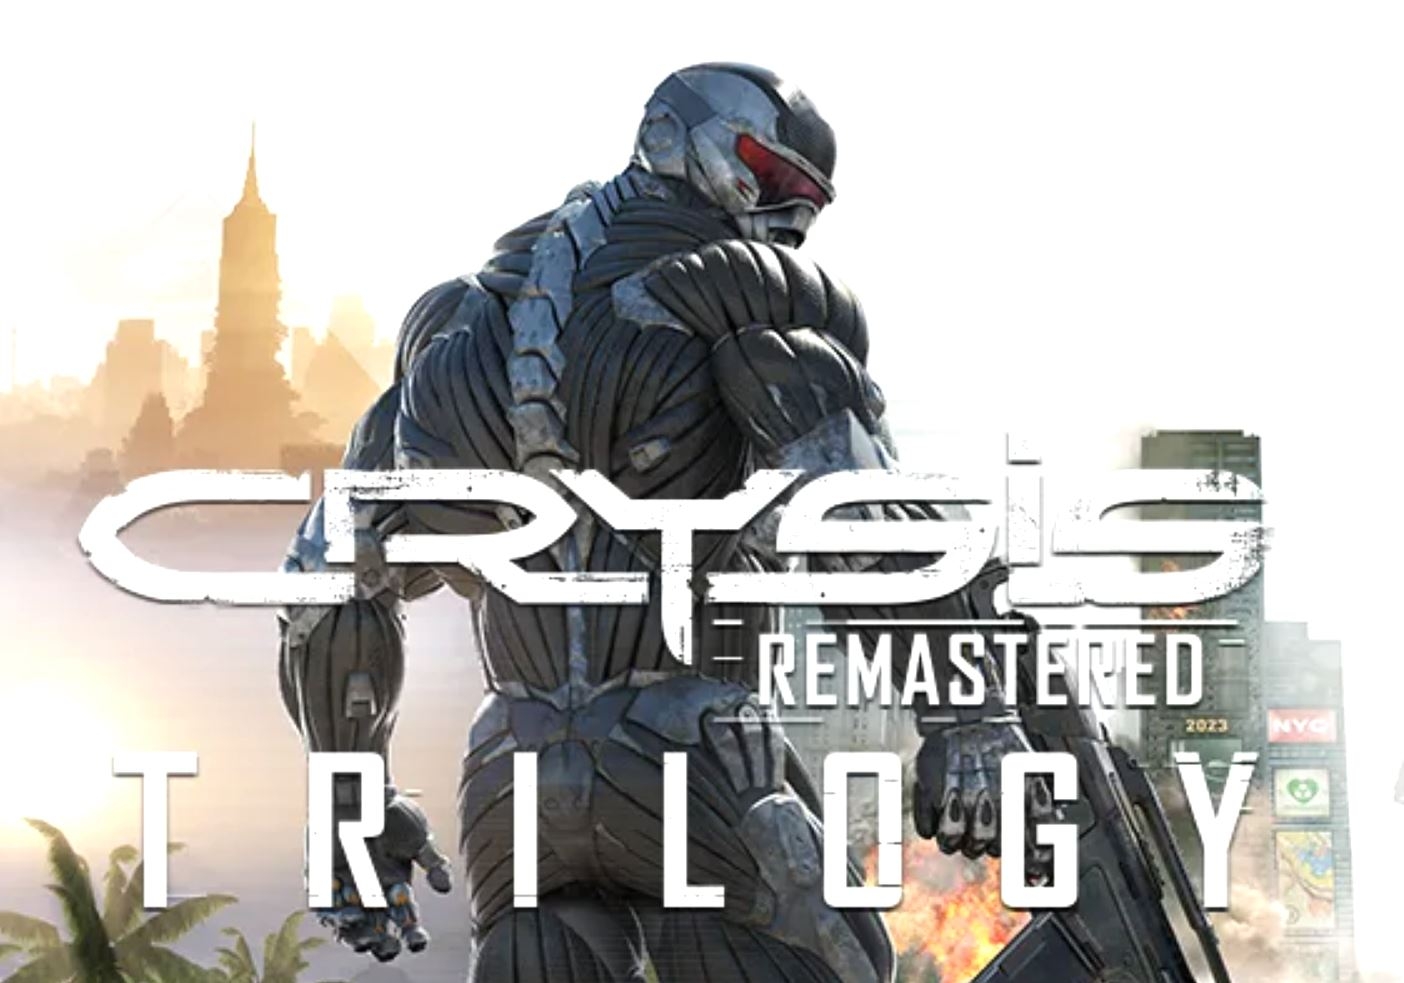 crysis remastered trilogy achievements